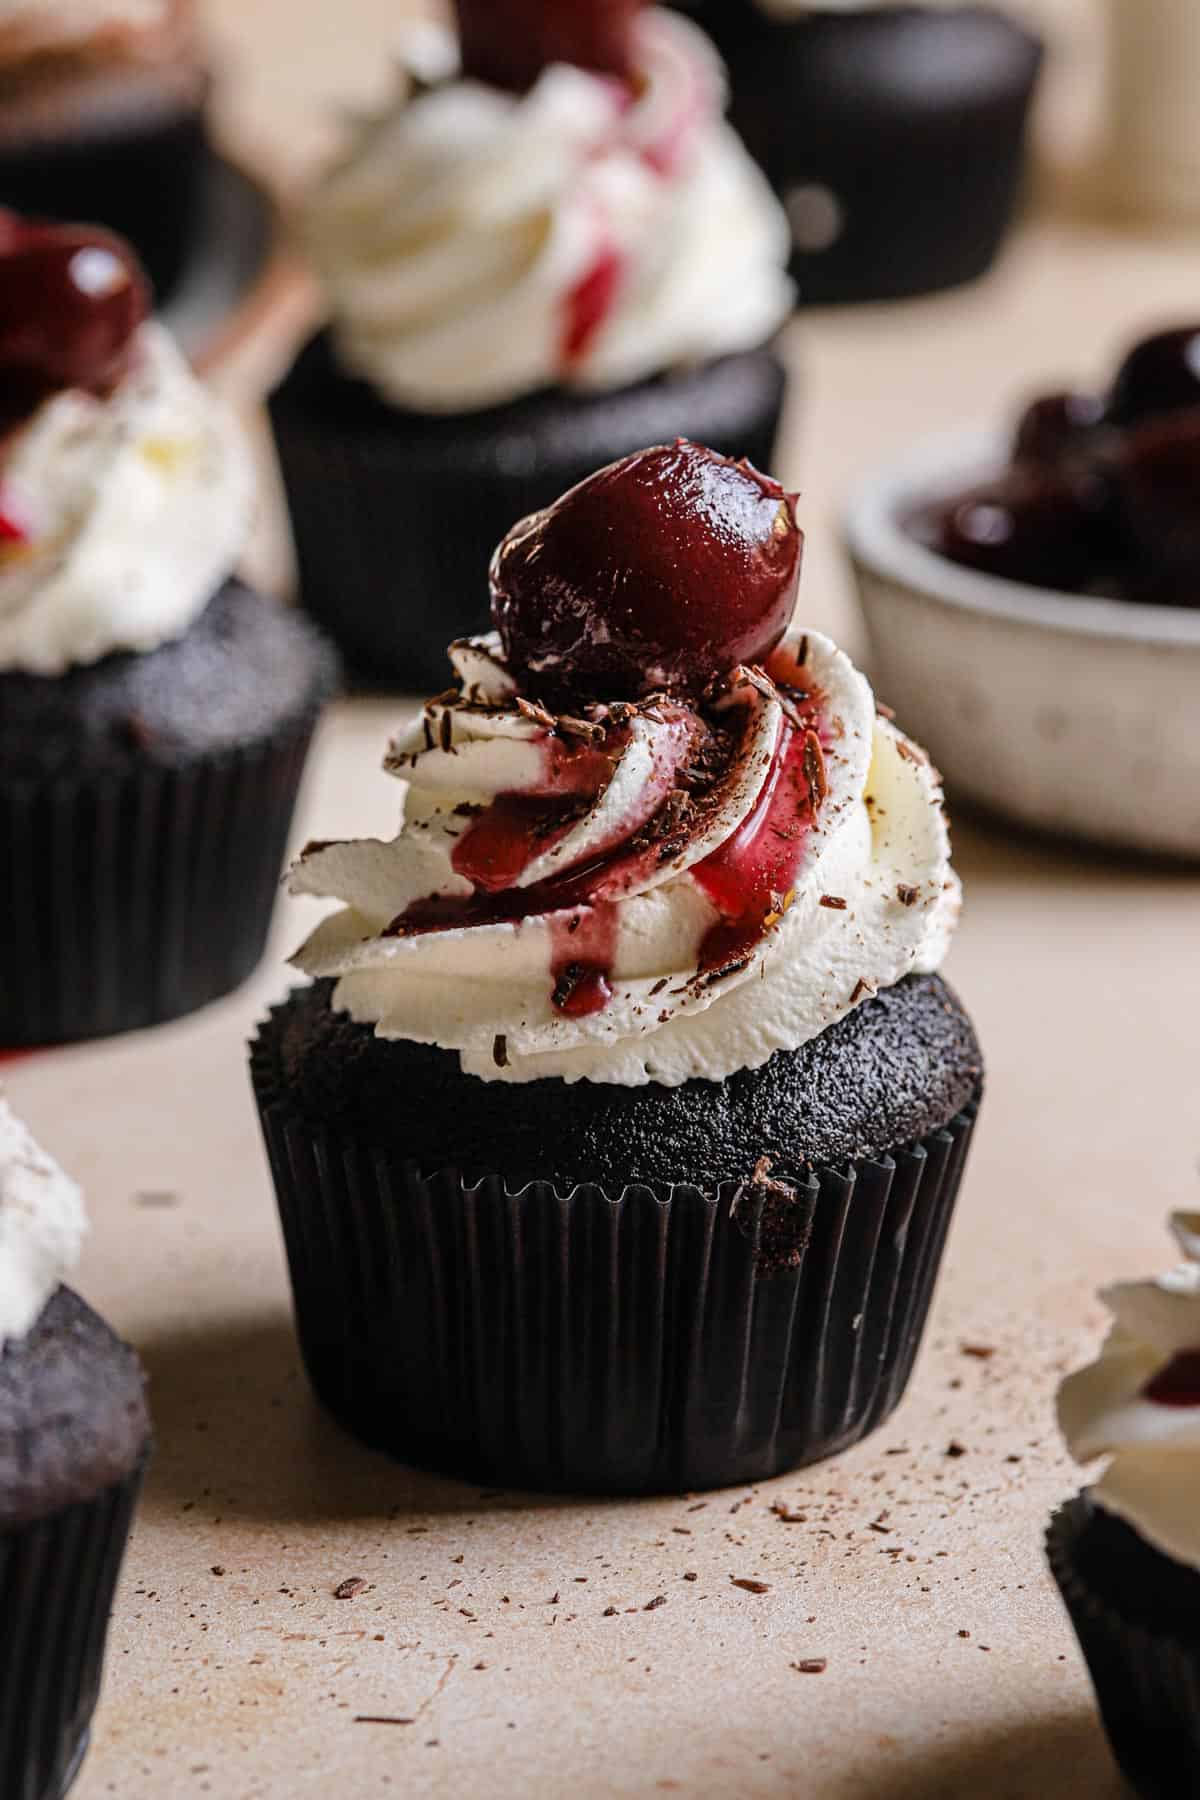 A Black forest cupcake, chocolate cupake filled with cherry filling and topped with whipped heavy cream